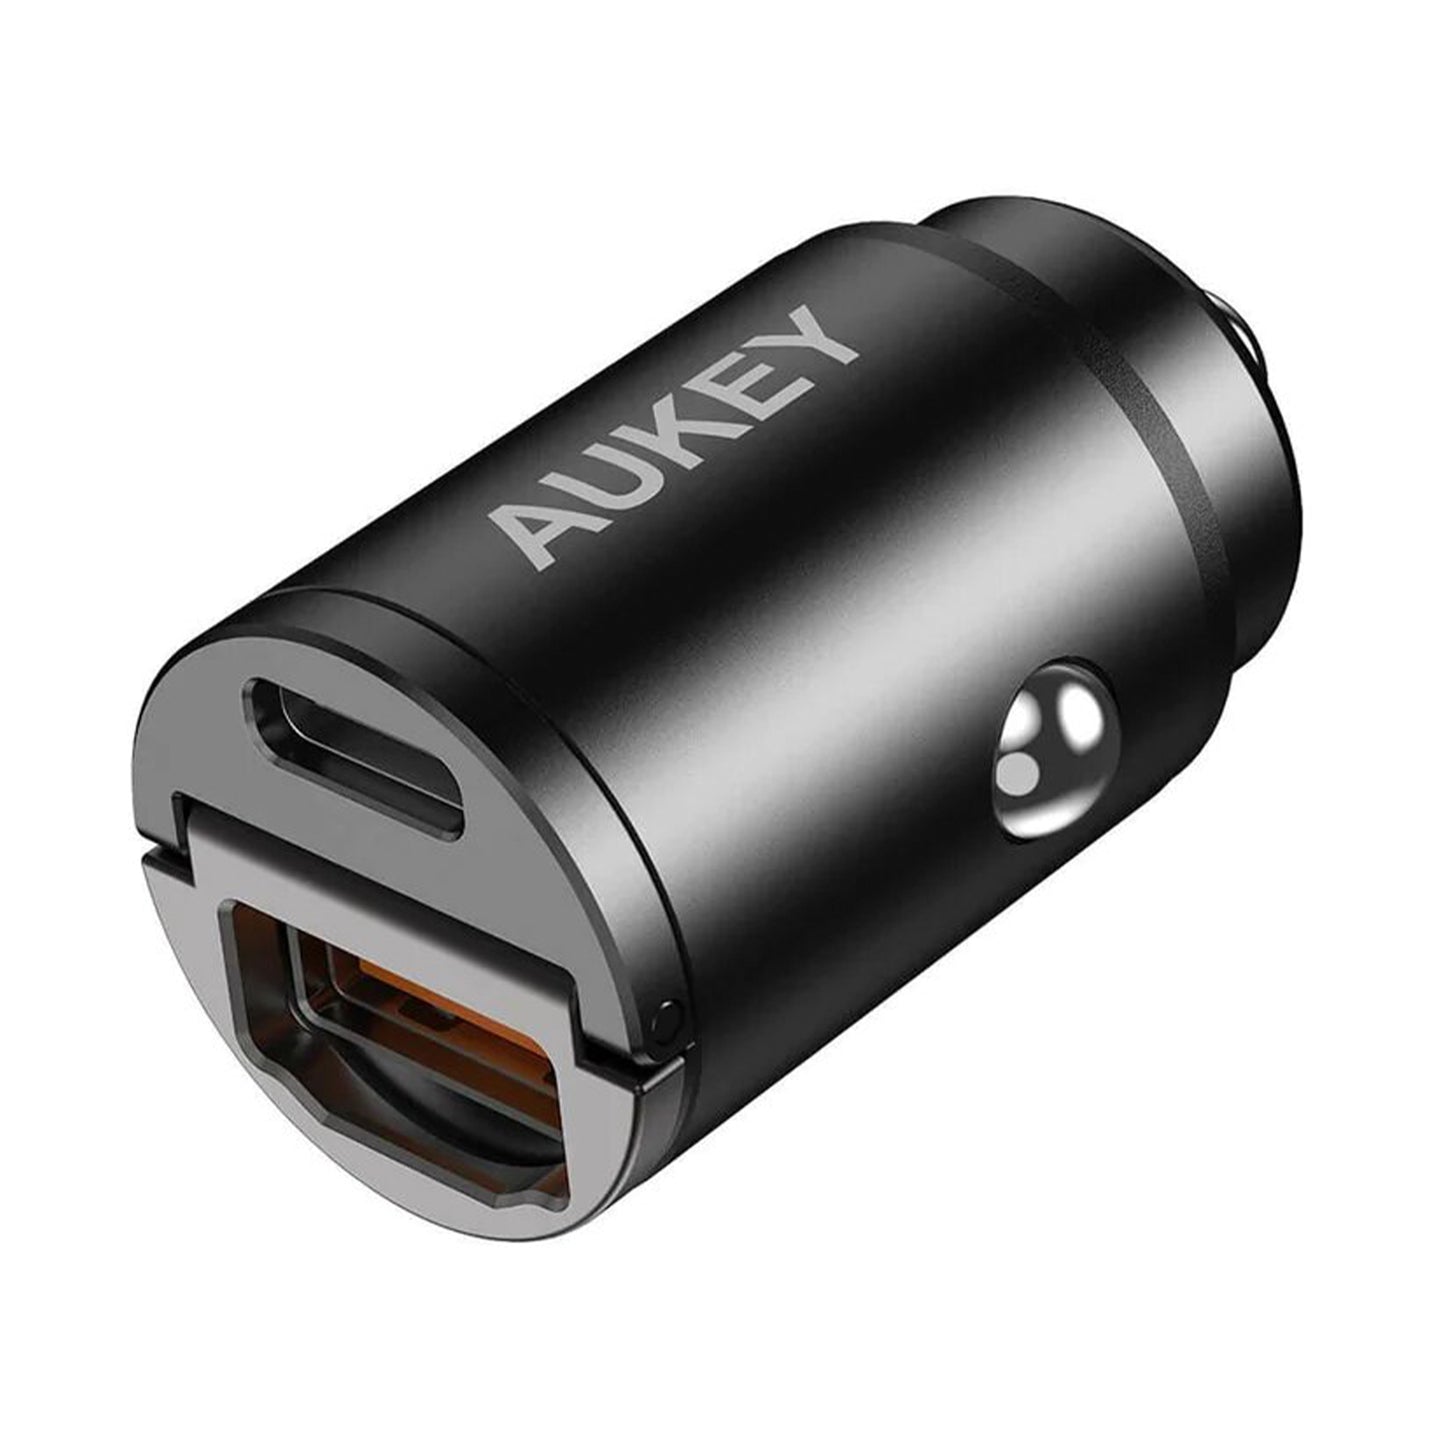 AUKEY 30W PD Metal Dual Port Fast Car Charger - Black